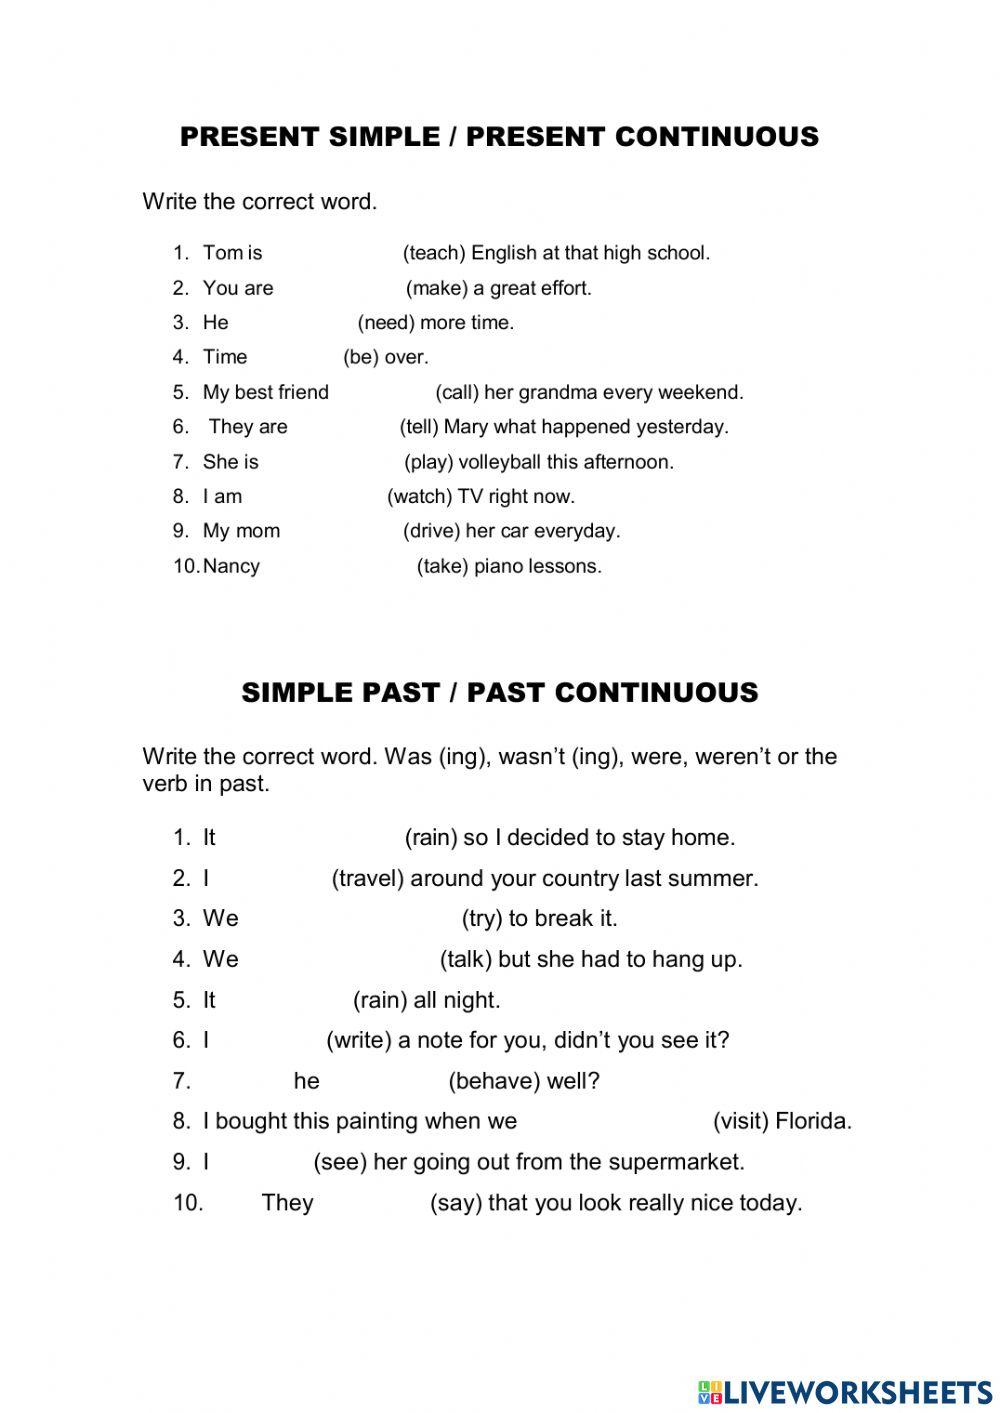 Present simple and simple past